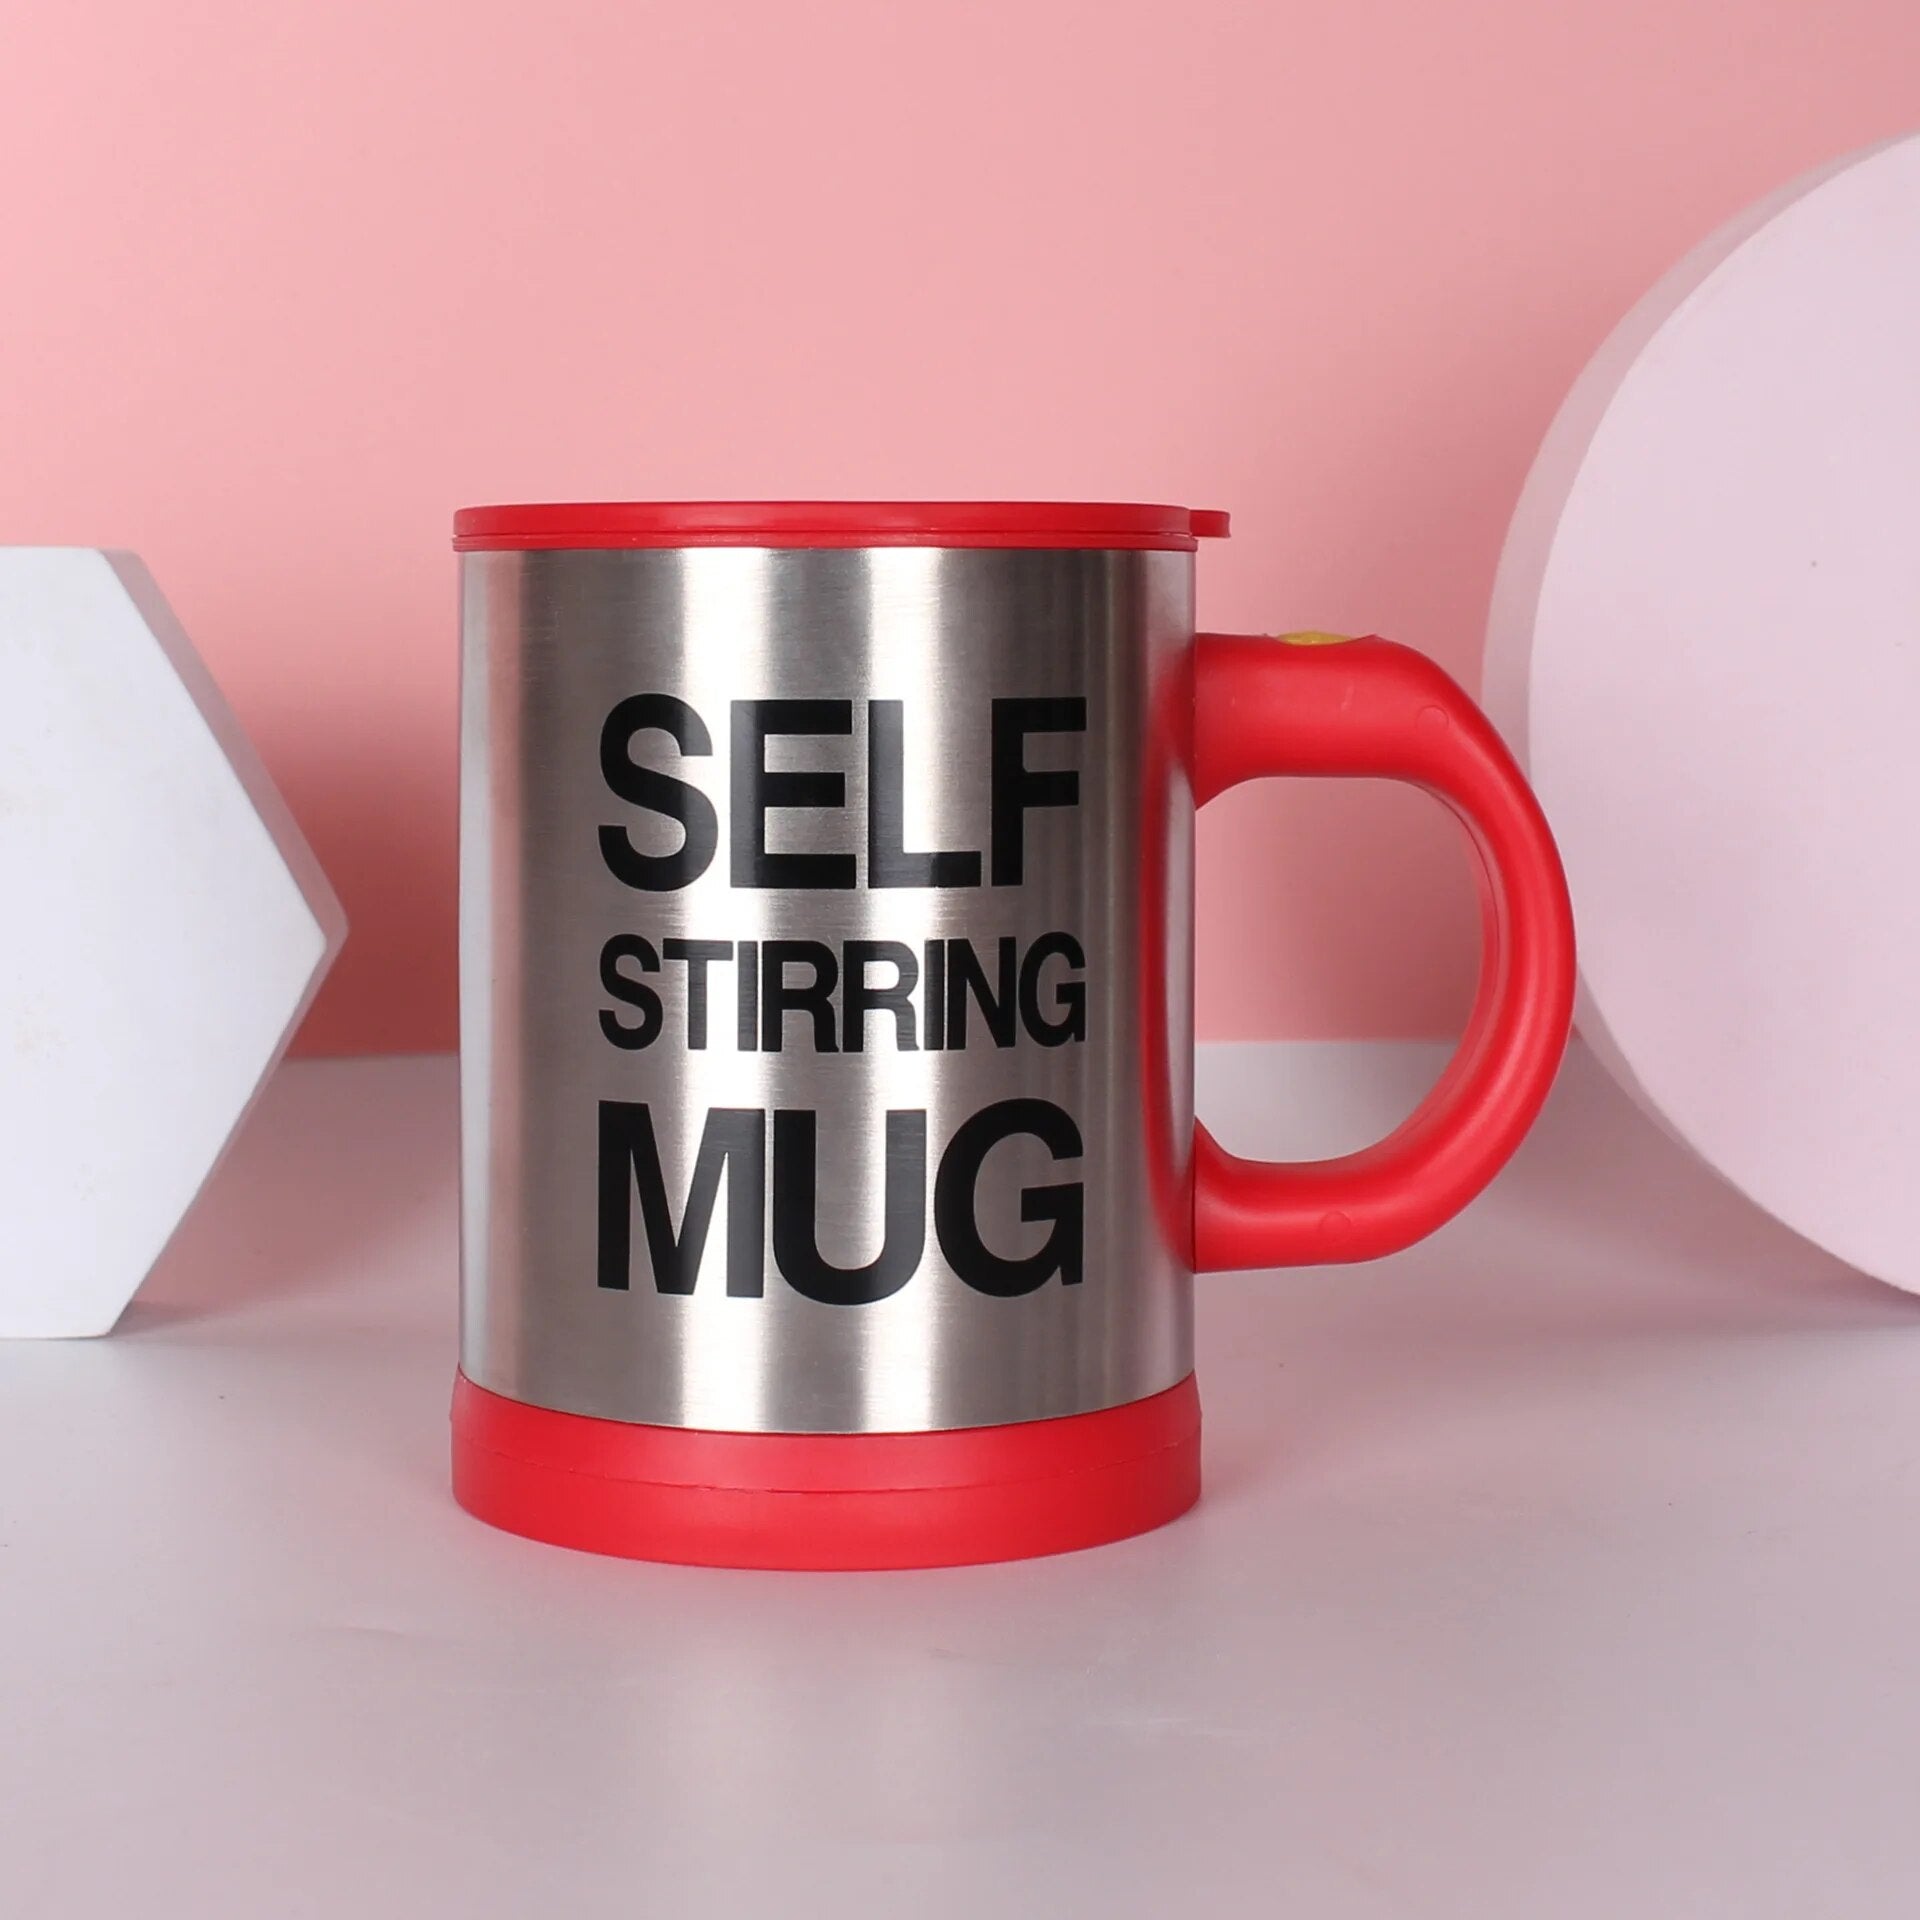 Self Stirring Mug Auto Self Mixing Stainless Steel Cup For Coffee/tea/hot  Chocolate/milk Mug For Office/kitchen/travel/home -450ml/15oz The Best  Giftp